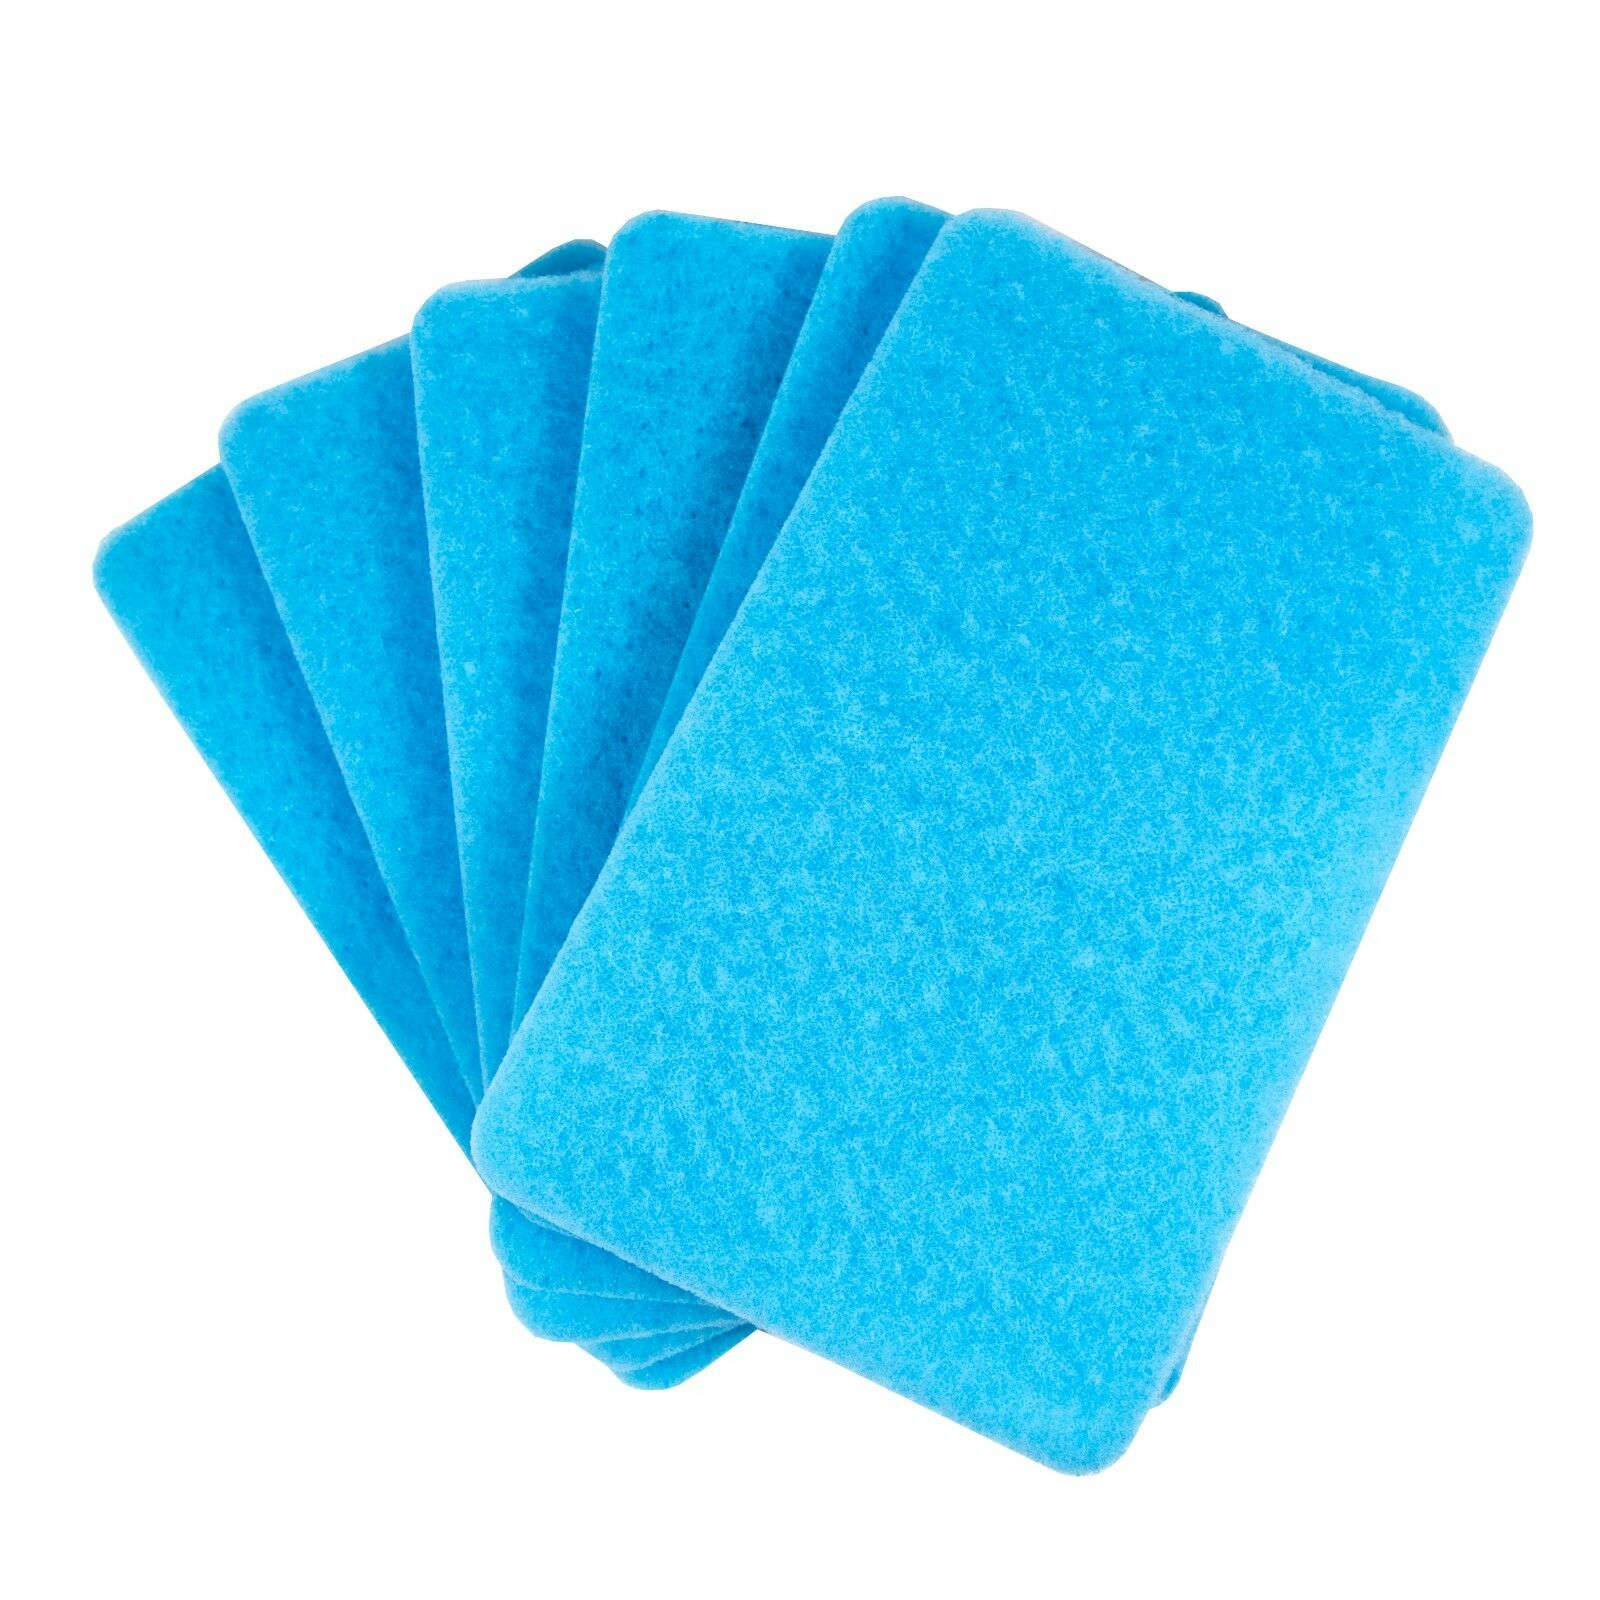 BUGS OUT Bug Removing Sponge (6 Pack) - No Scratch - Cars, Trucks, RVs, and Boats